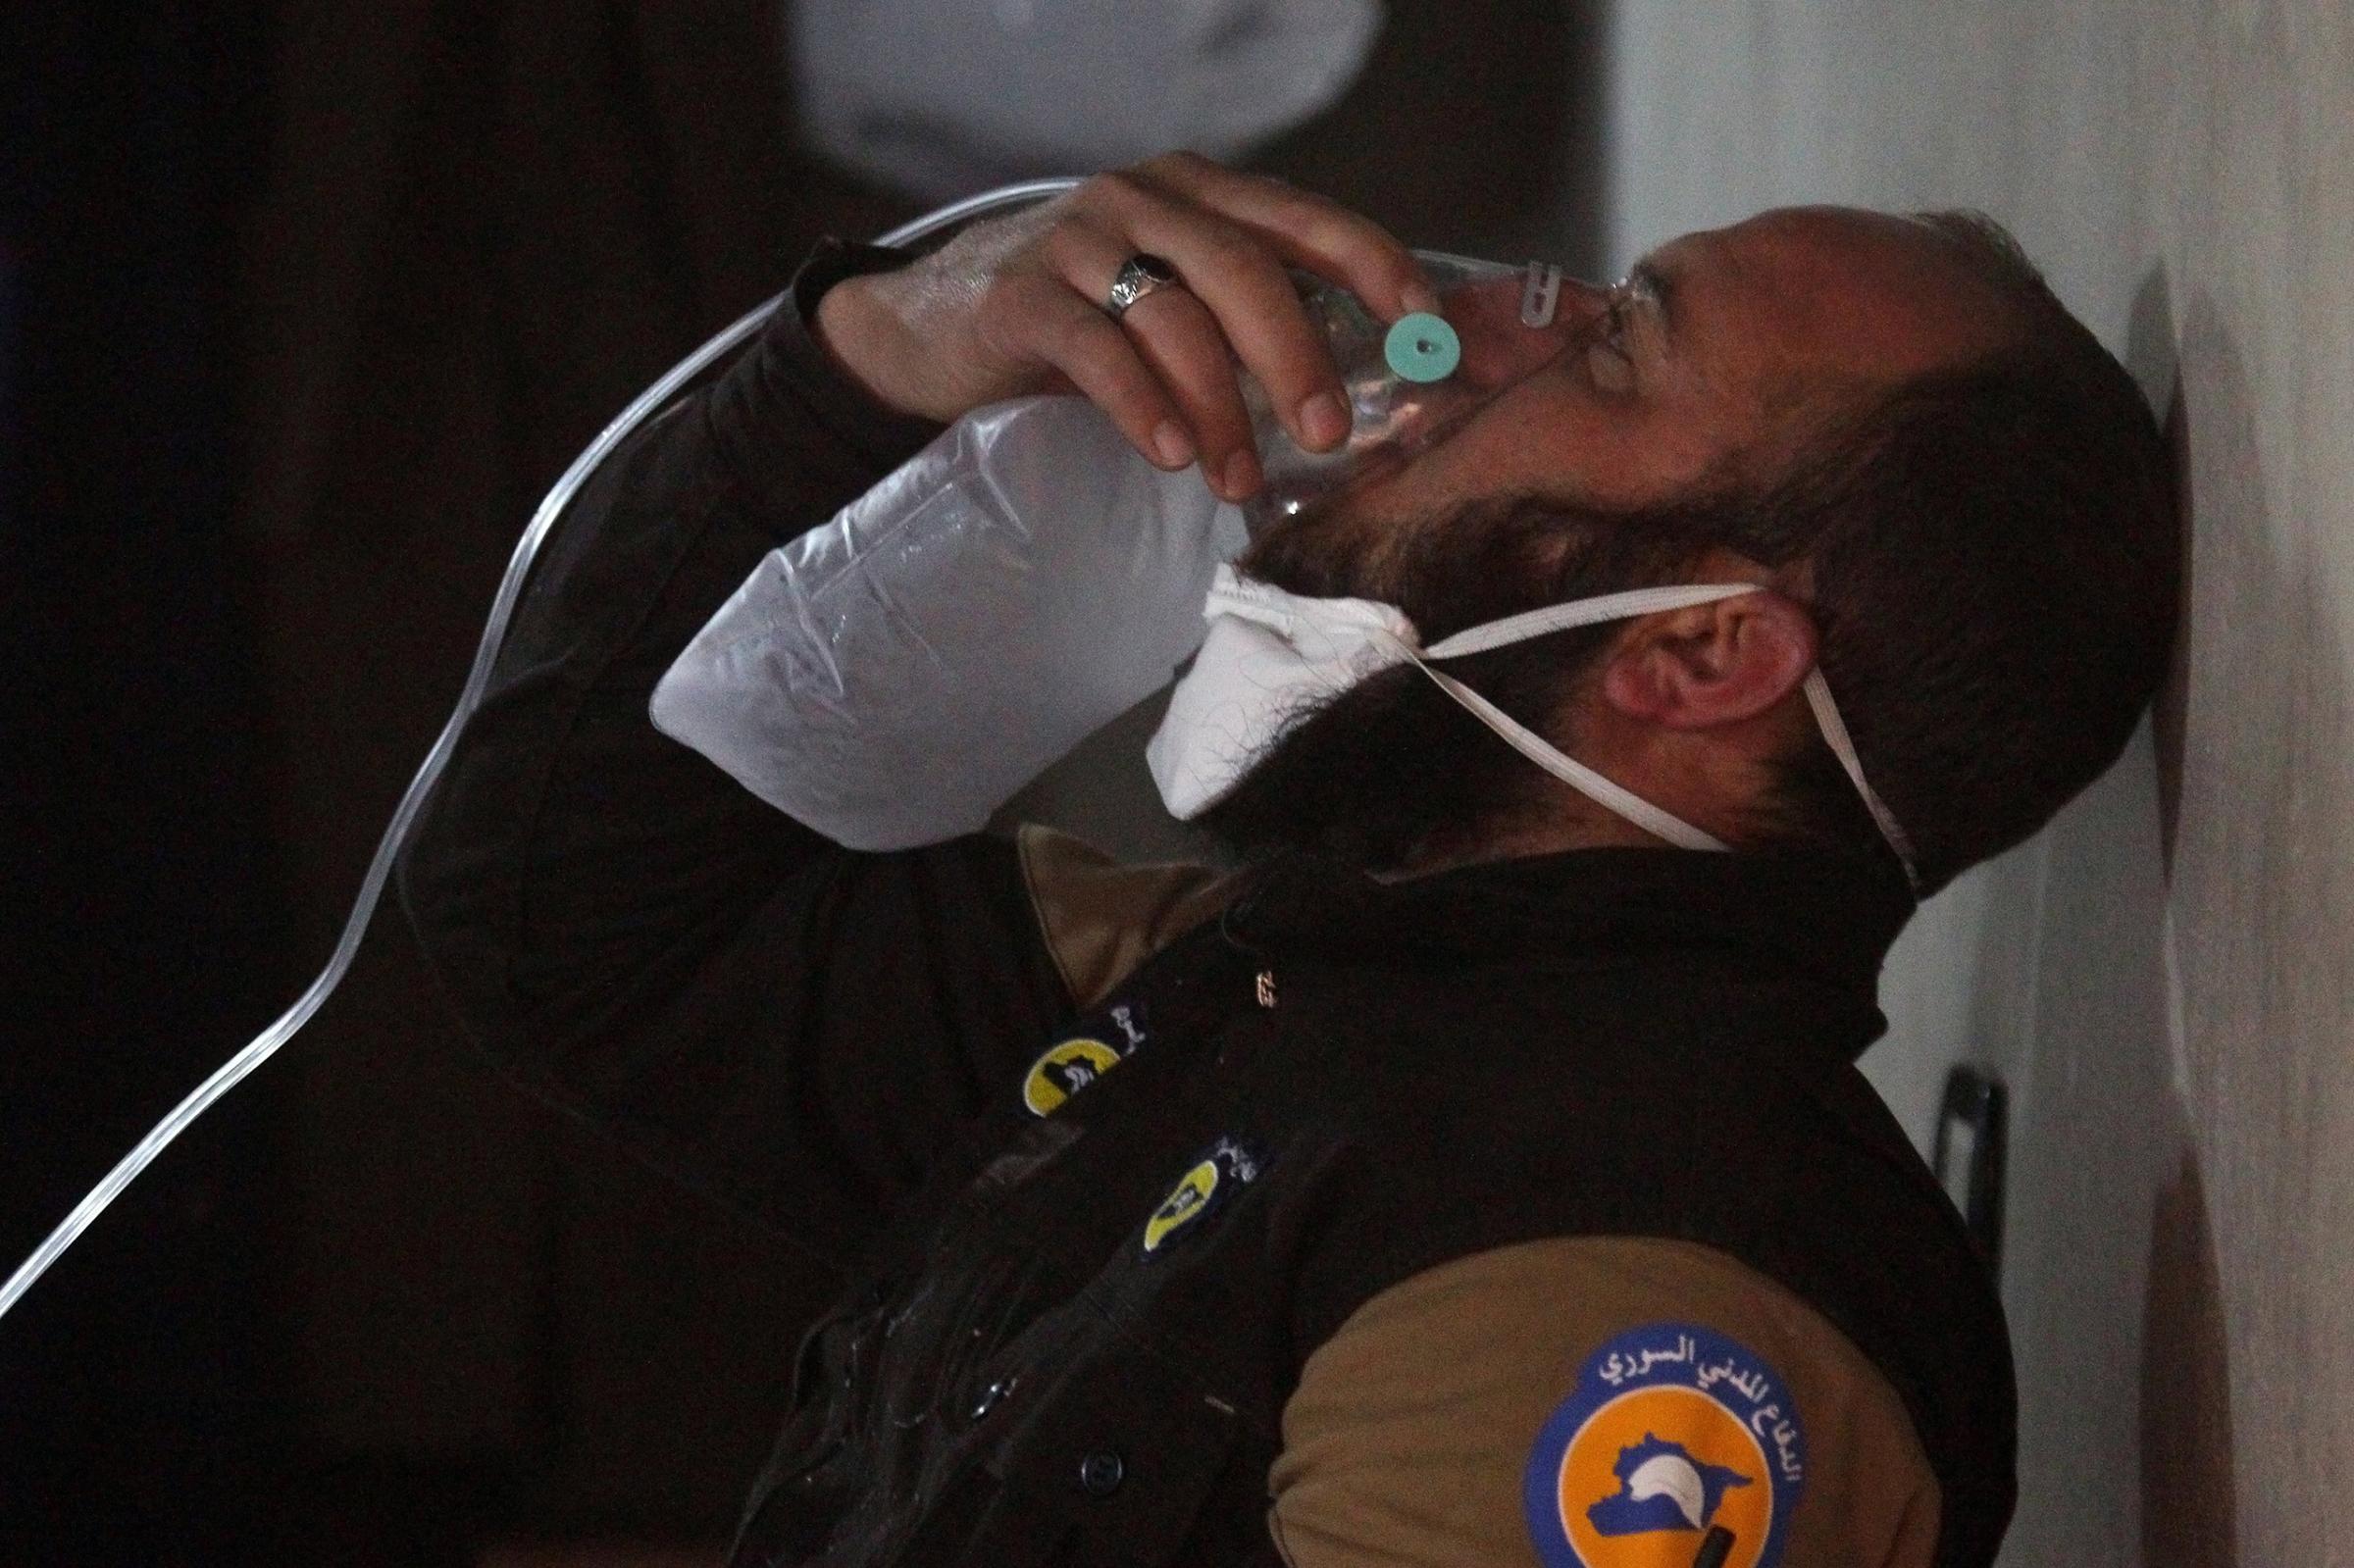 A civil defence member breathes through an oxygen mask after what rescue workers described as a suspected gas attack in the town of Khan Sheikhoun, in rebel-held Idlib, Syria, on April 4, 2017.